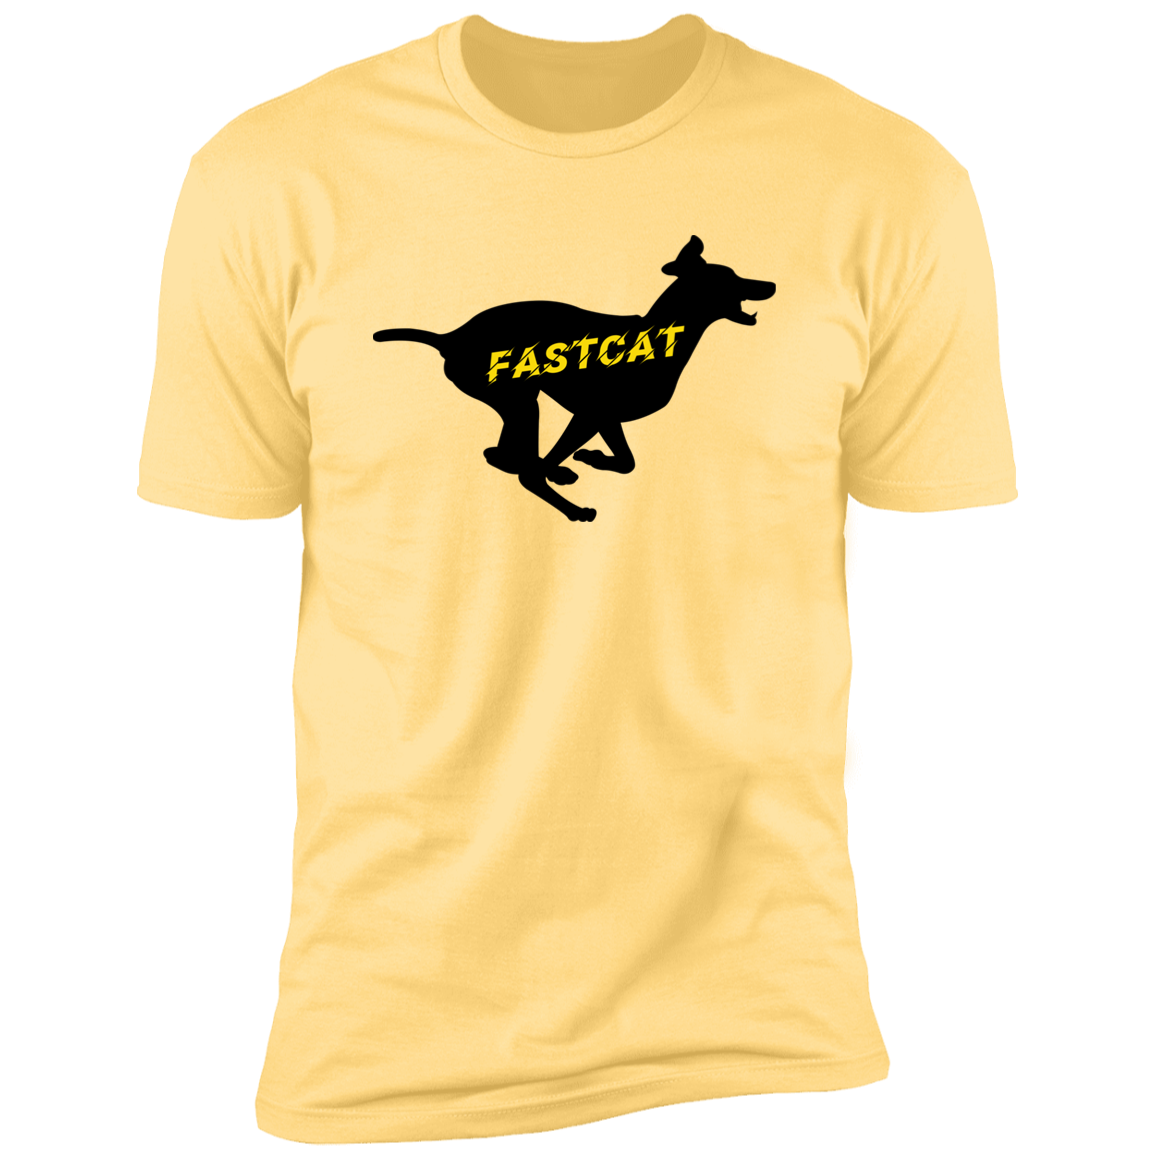 FastCAT Dog T-shirt, sporting dog t-shirt for humans, FastCAT t-shirt, in yellow